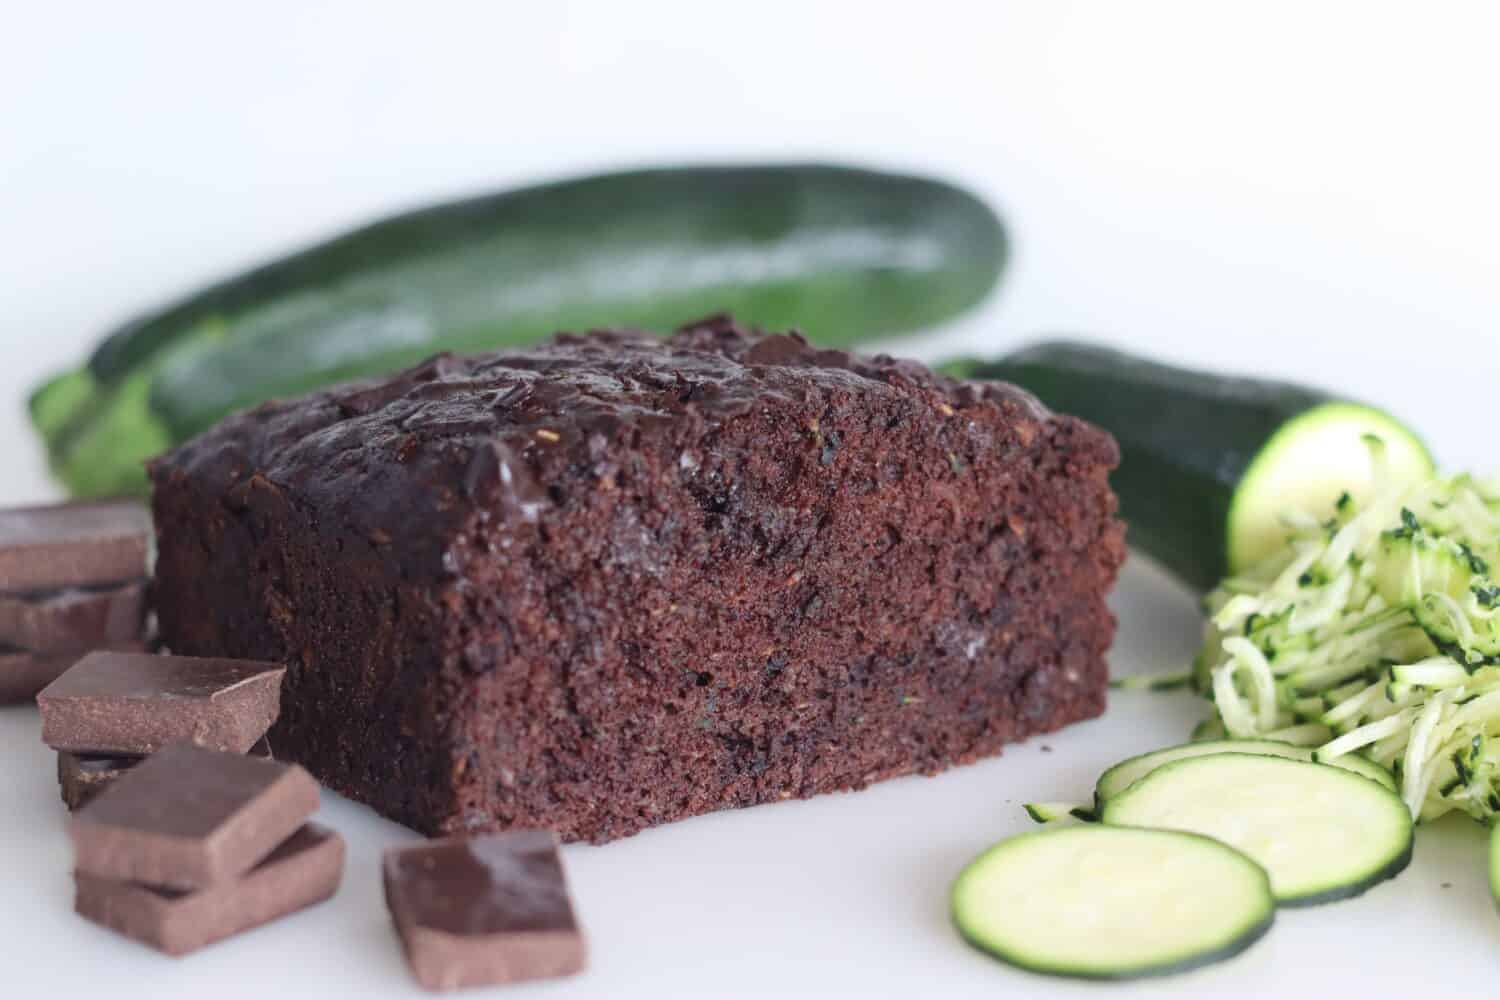 Zucchini chocolate cake. Moist double chocolate cake with grated zucchini, coco powder, chocolate and chocolate chips. Shot on white background